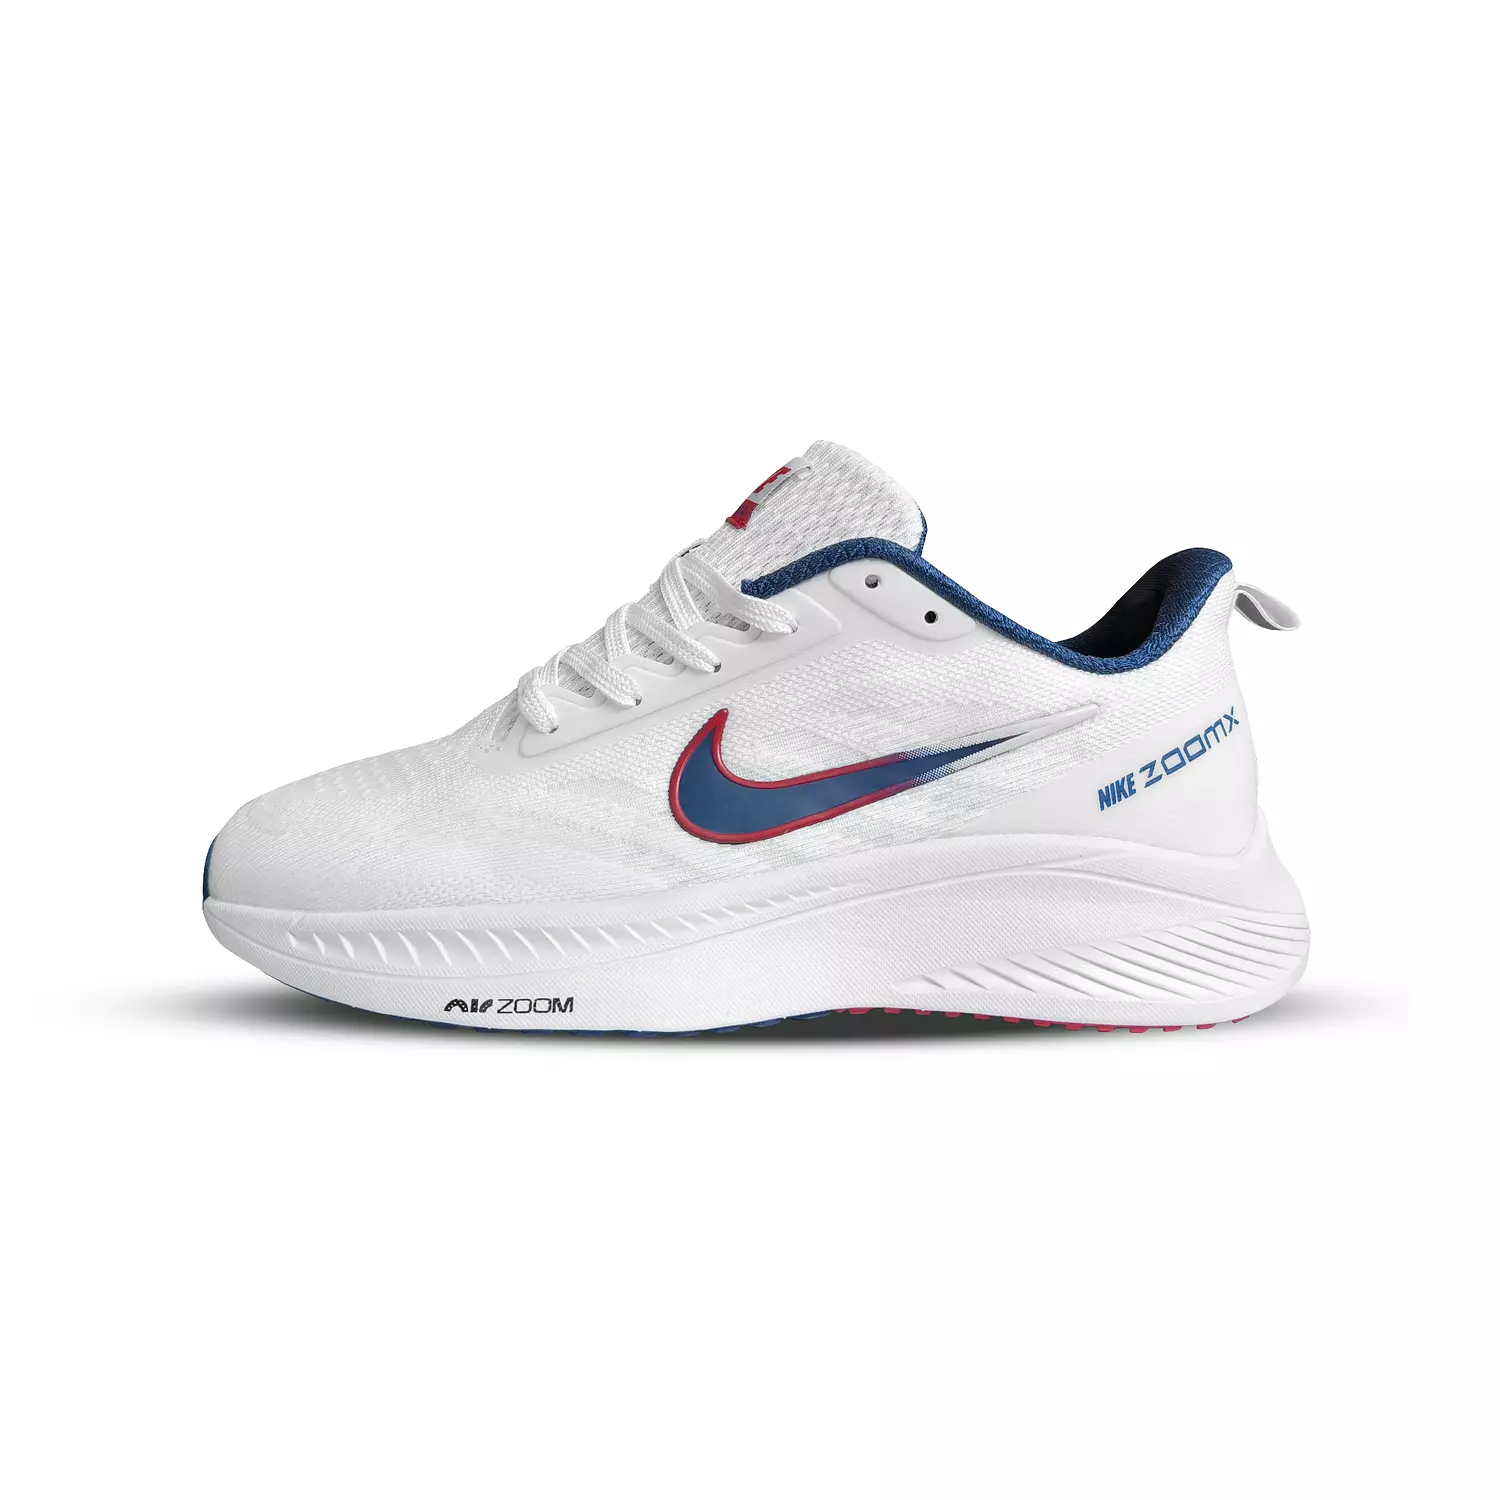 NIKE AIR ZOOM X -RUNNING SHOES 0